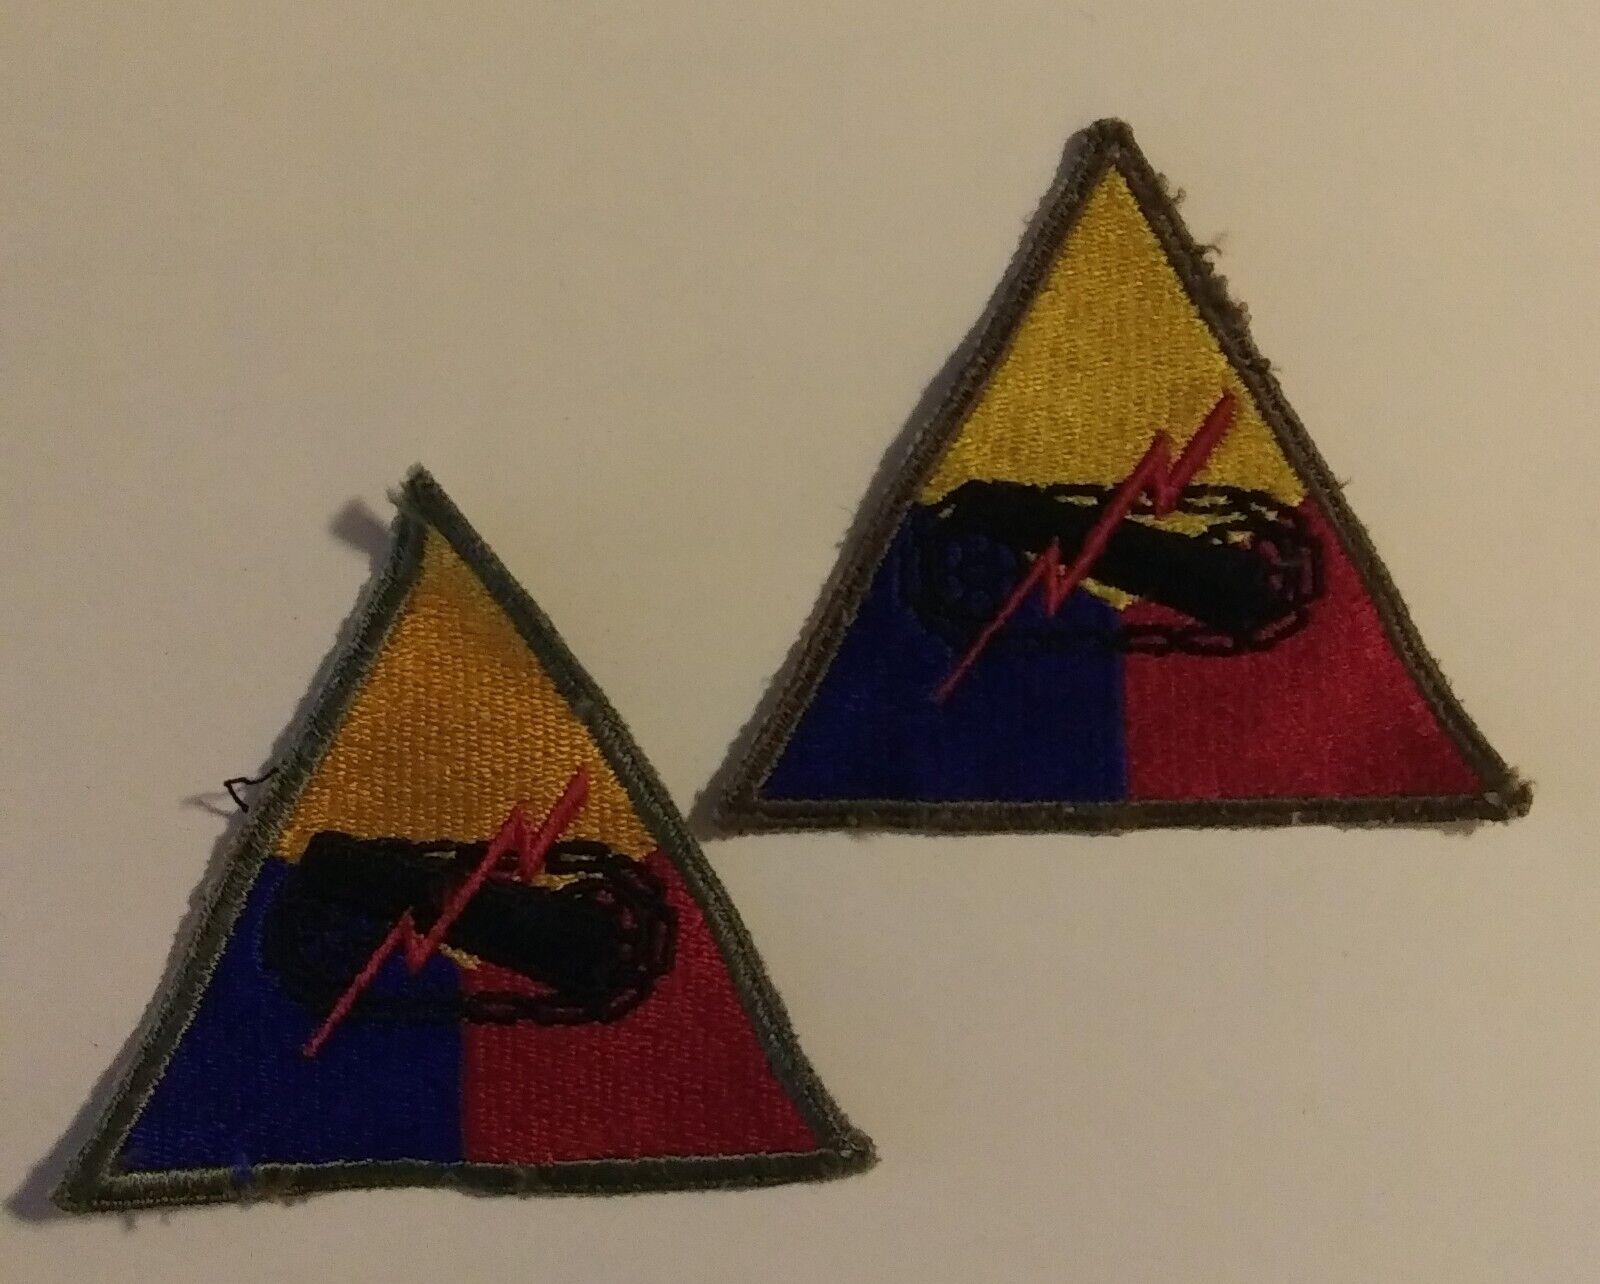 WW2 US Army Armored Forces Greenback Division Regiment Triangle Patches Set of 2